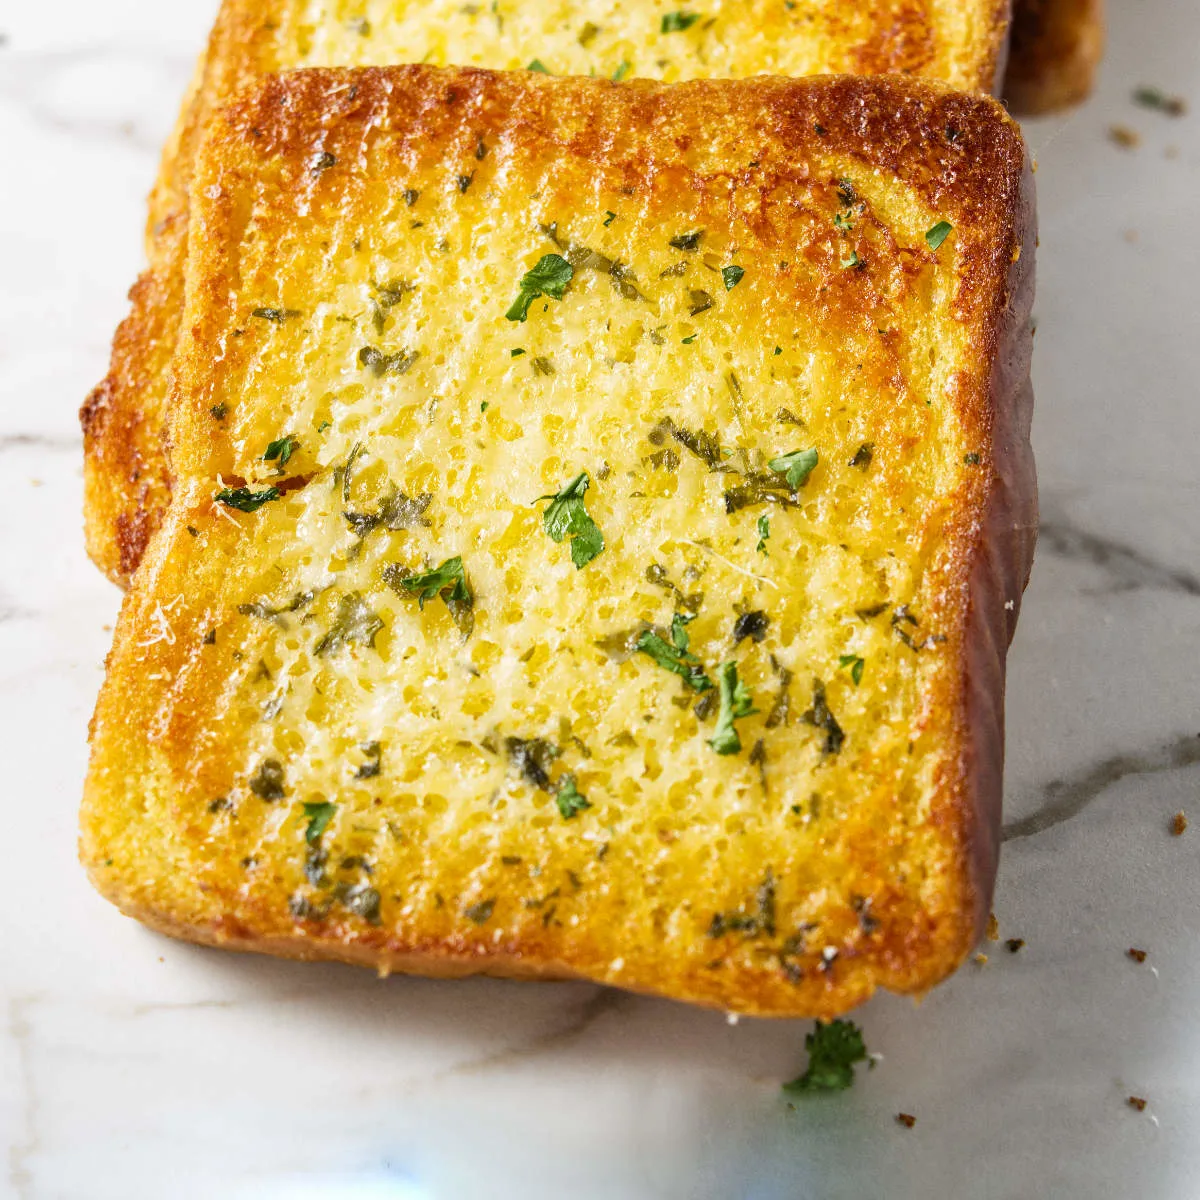 A thick slice of garlic bread made with Texas toast sandwich bread.